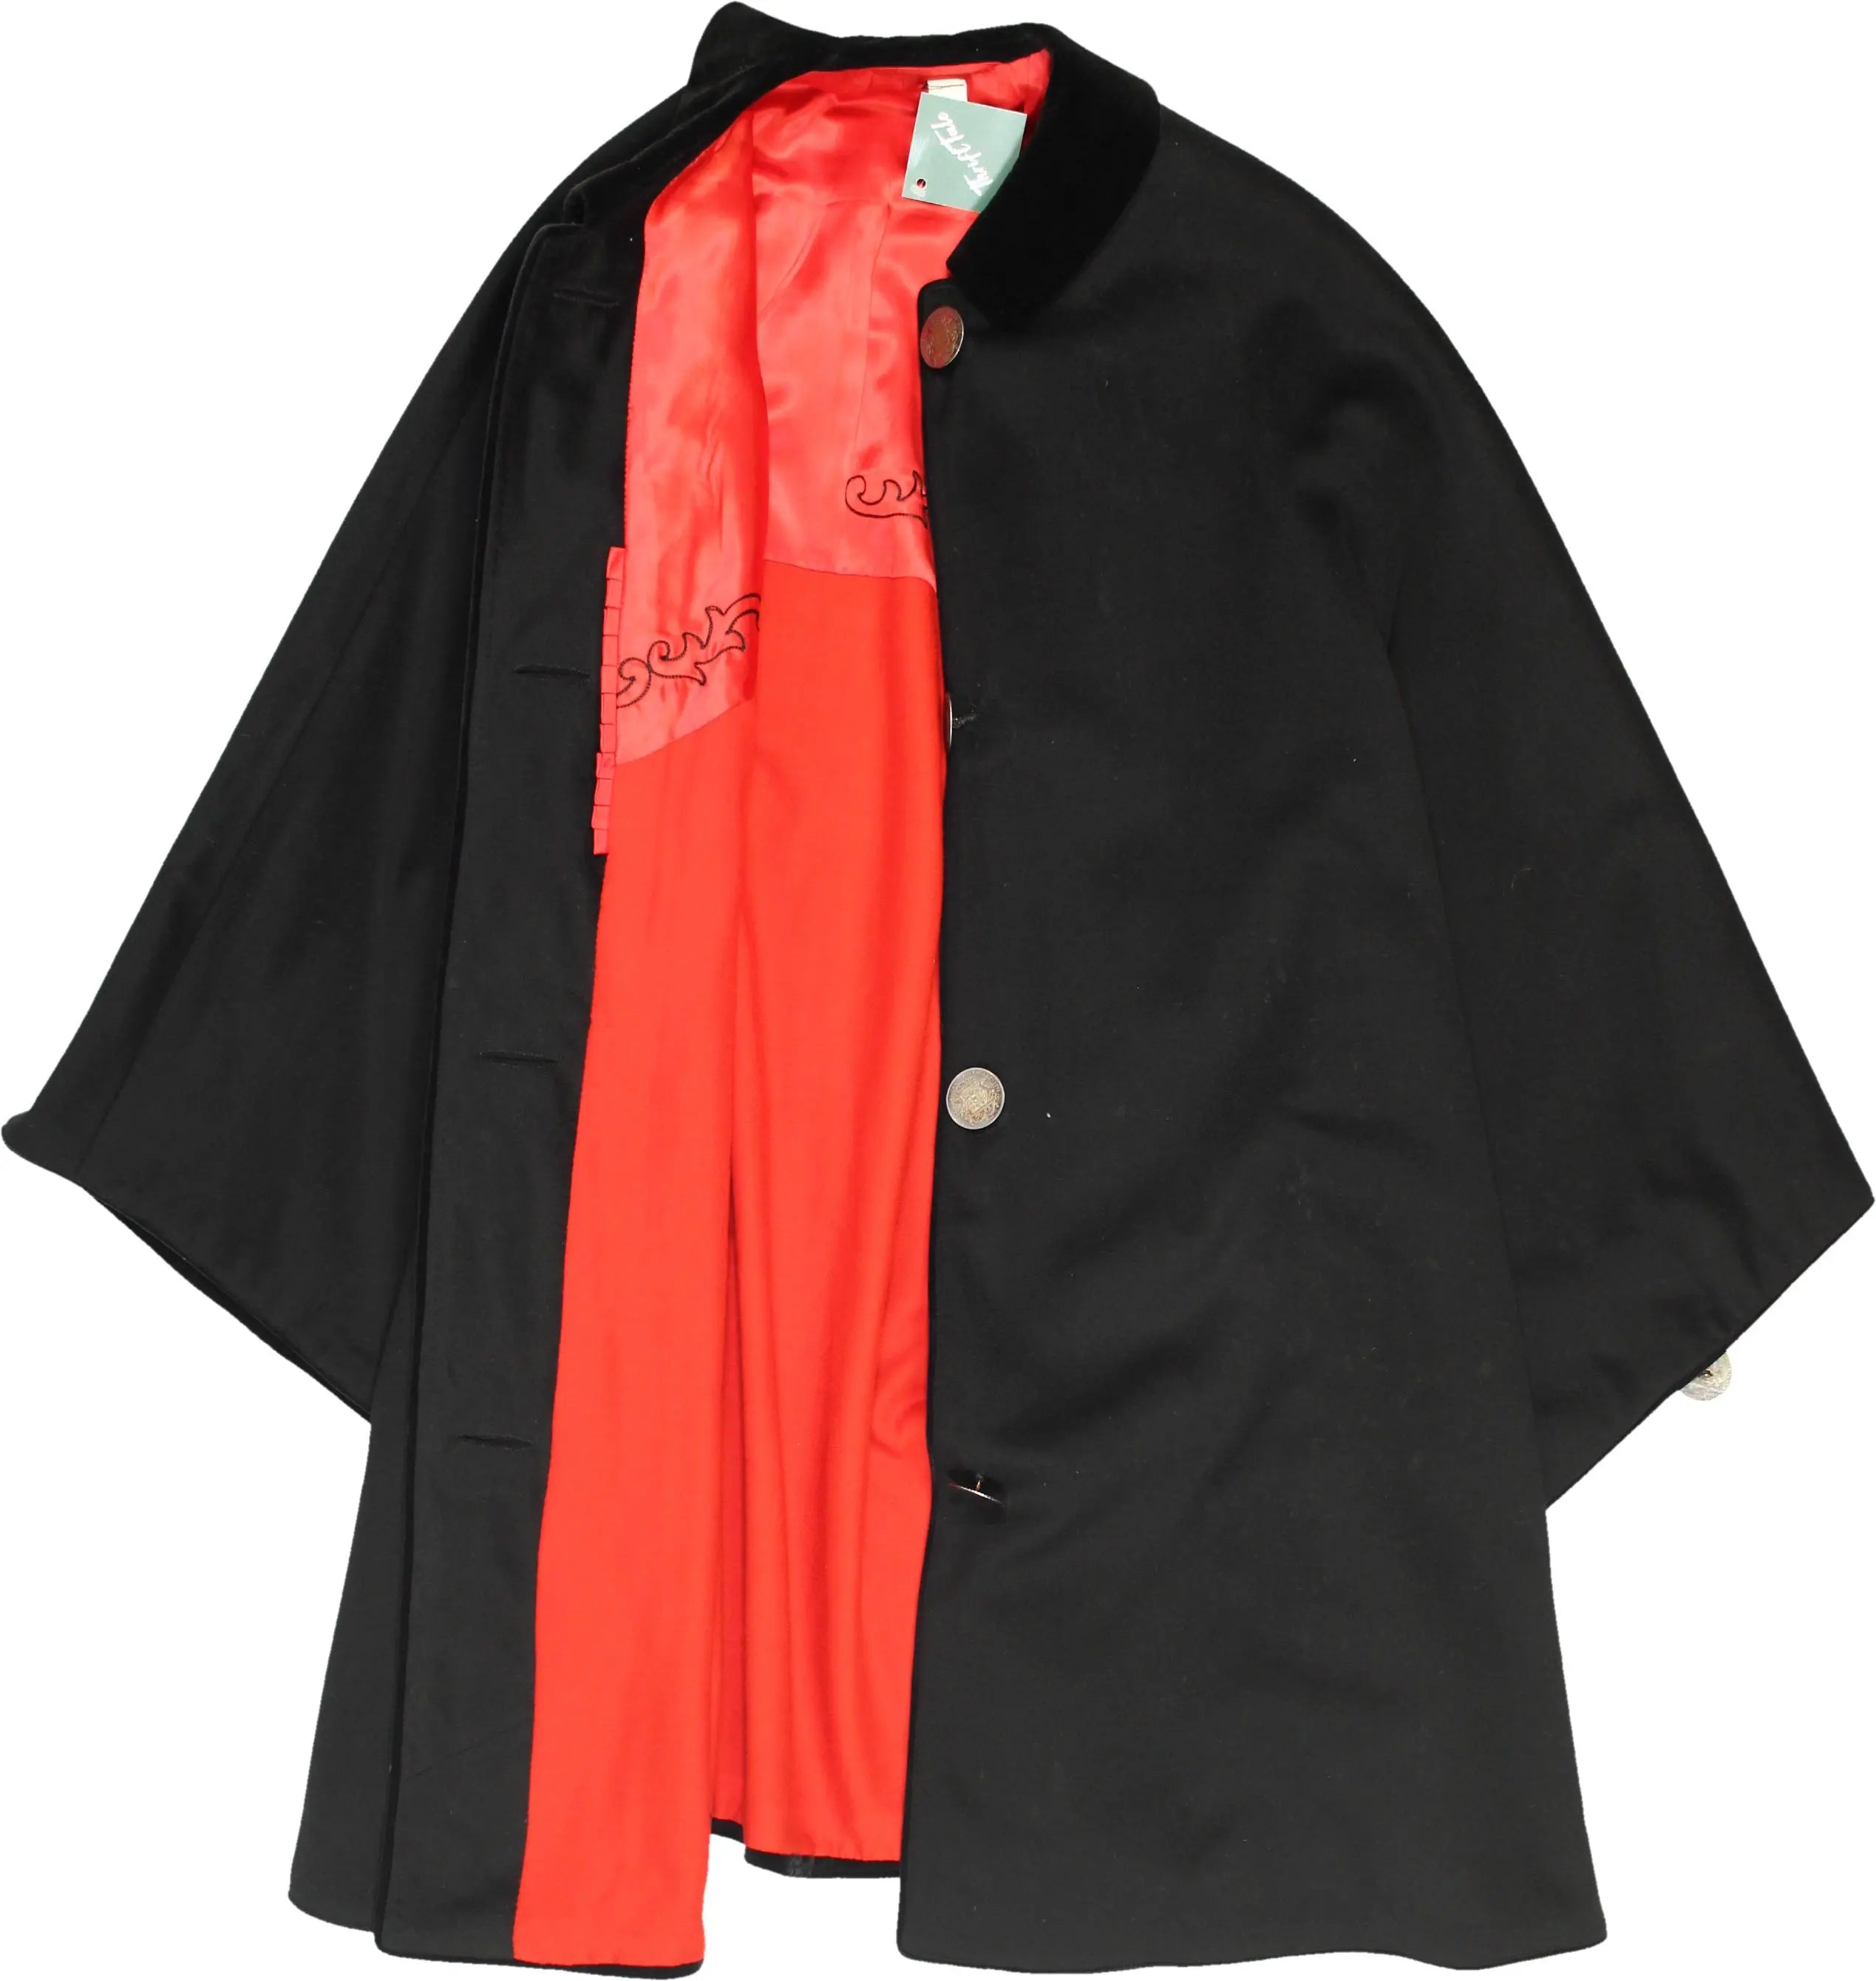 L.H. van Hees München - Traditional Cape with Archid Avst Dux Buttons- ThriftTale.com - Vintage and second handclothing